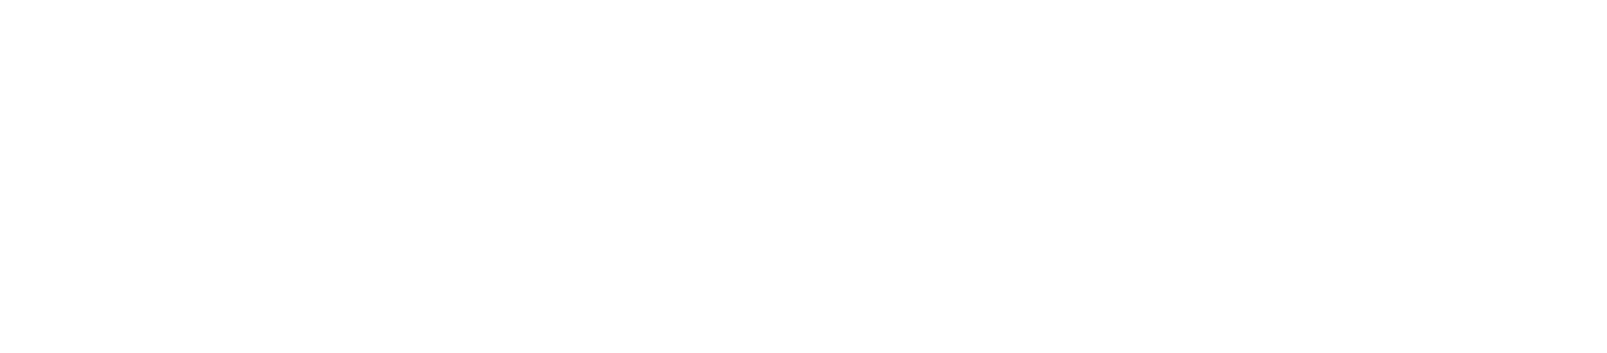 Koorsen_ Fire and Security logo-white-fnl.png